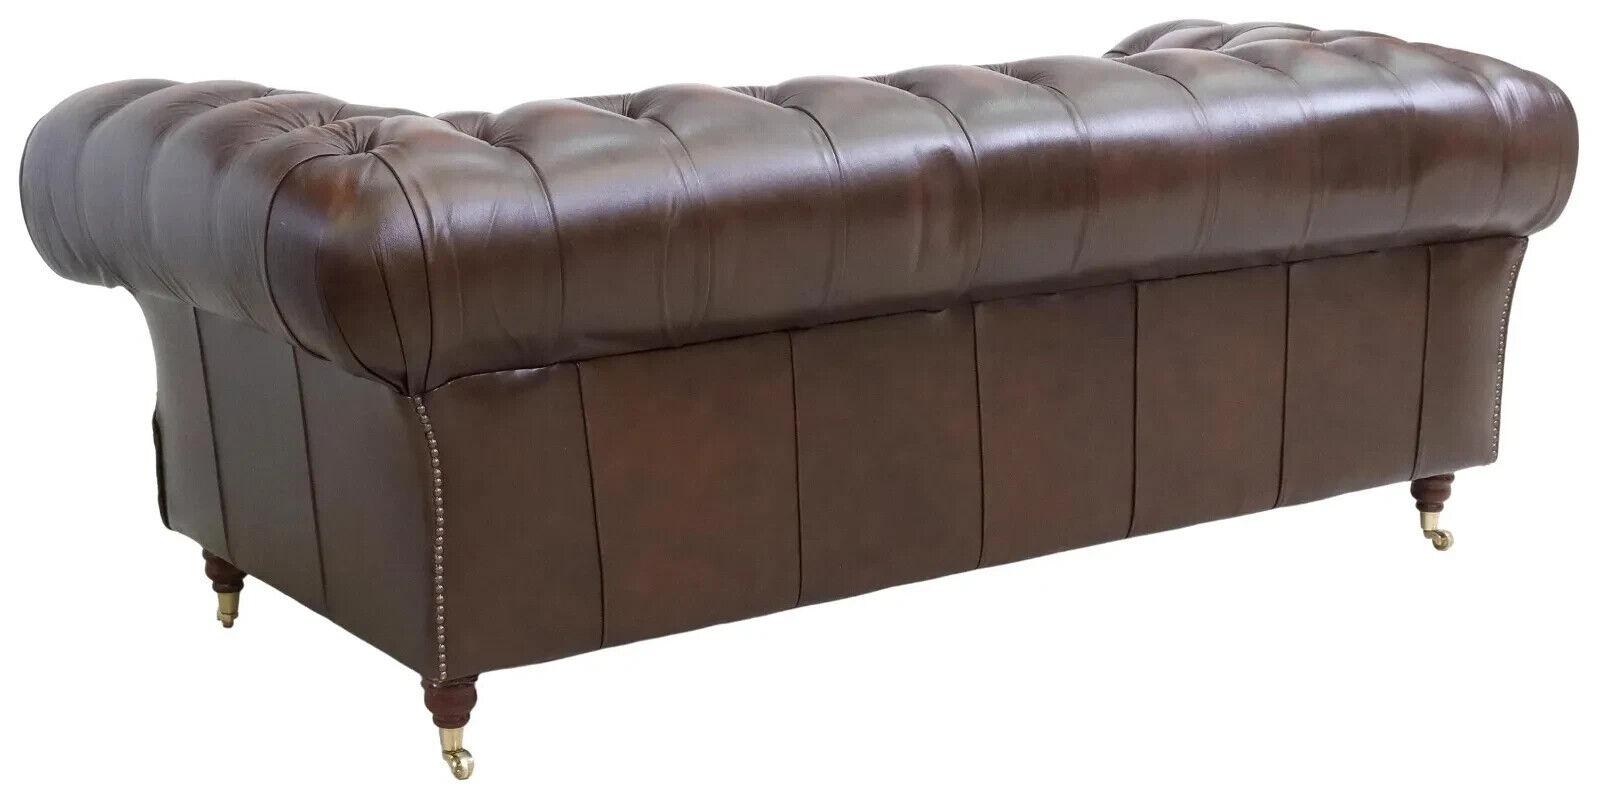 20th Century Sofa, Leather, Brown, English Chesterfield Style, Nailhead, Rolled Arms, Tufted